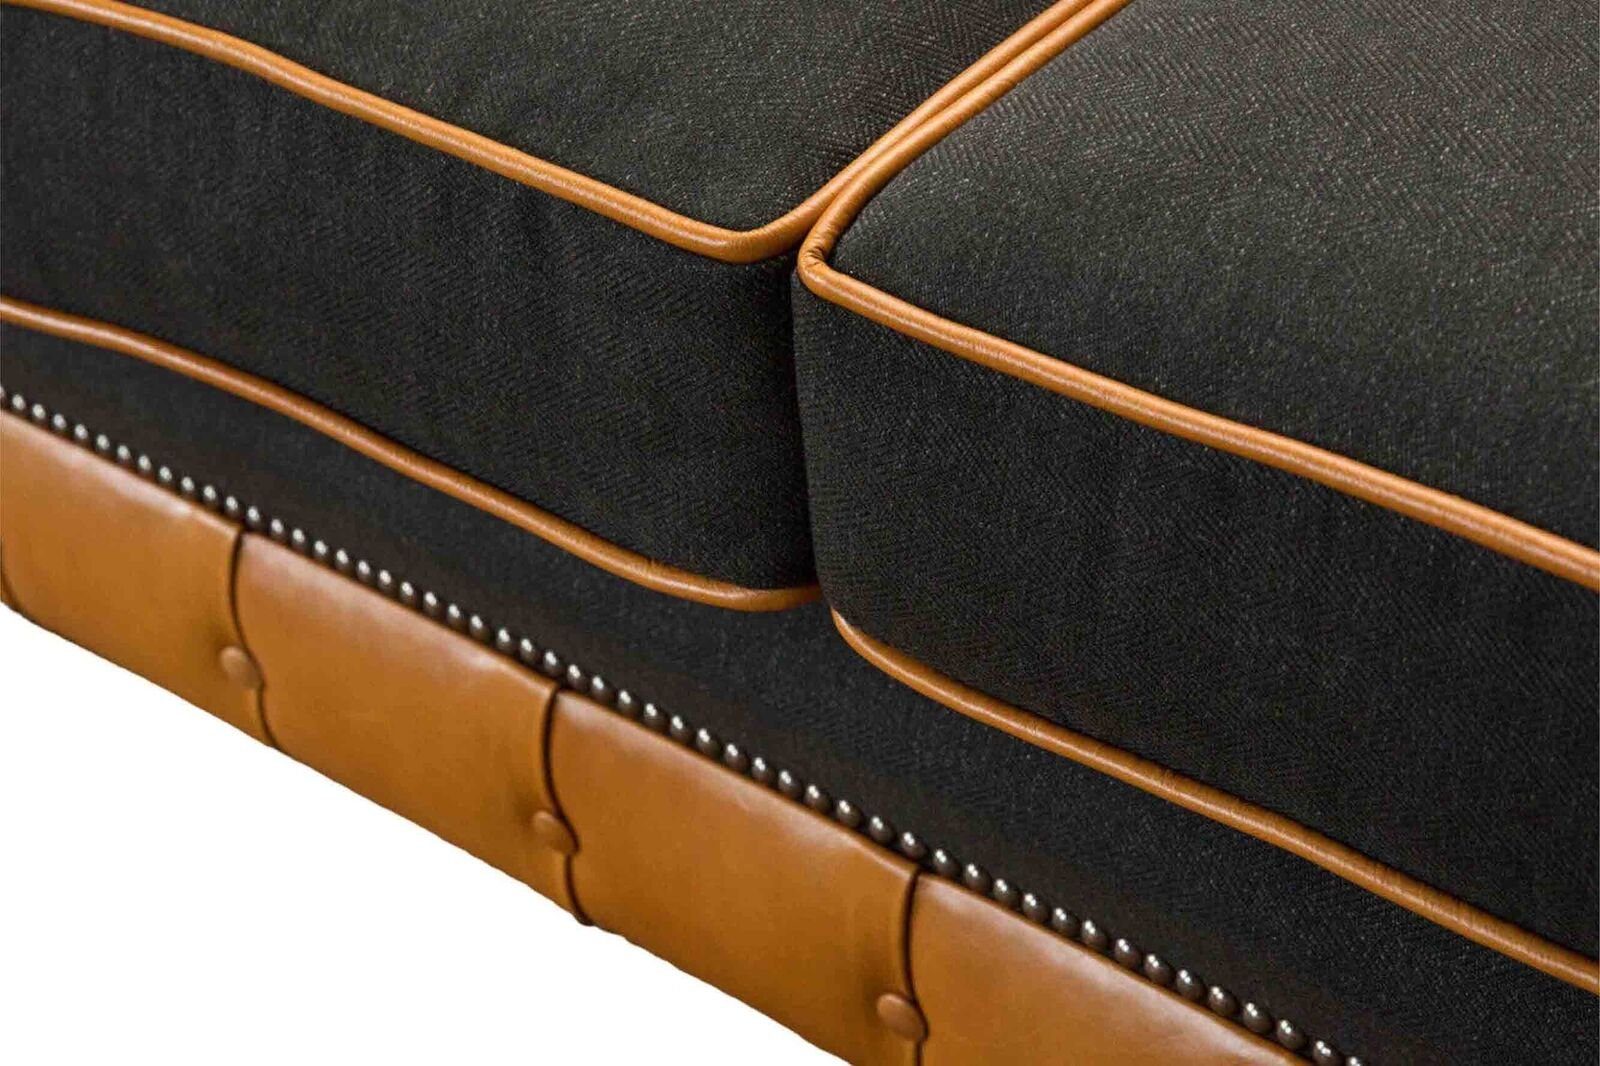 JVmoebel Sofa Chesterfield Ledersofa Textil In Sofa Couch Polster Made 2 Europe Sofas, Sitzer